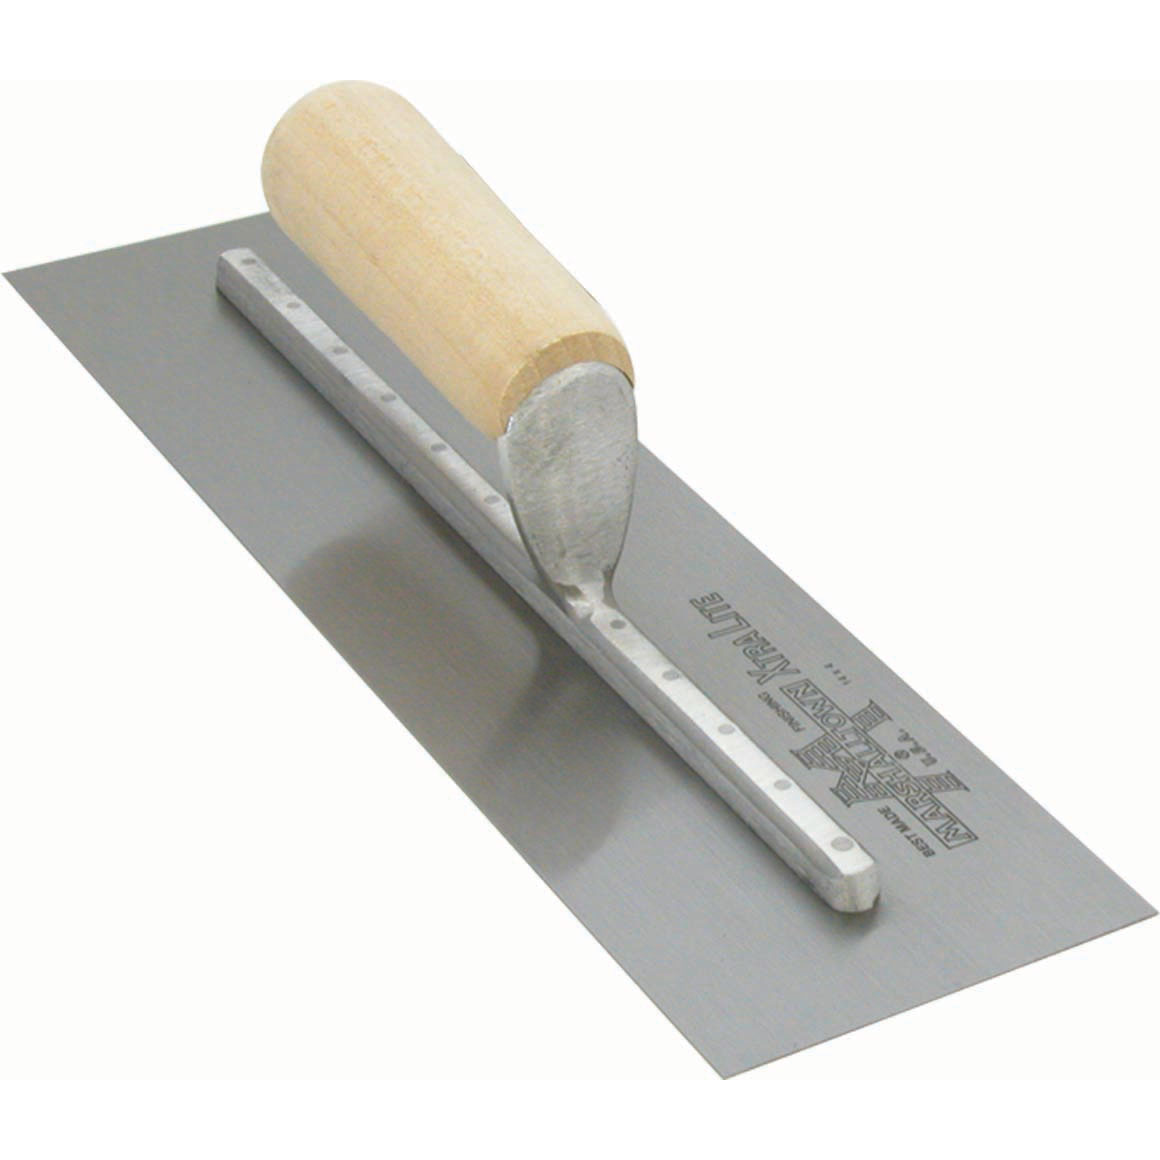 Marshalltown MX64 14in x 4in Finishing Trowel with Straight Wood Handle MX64